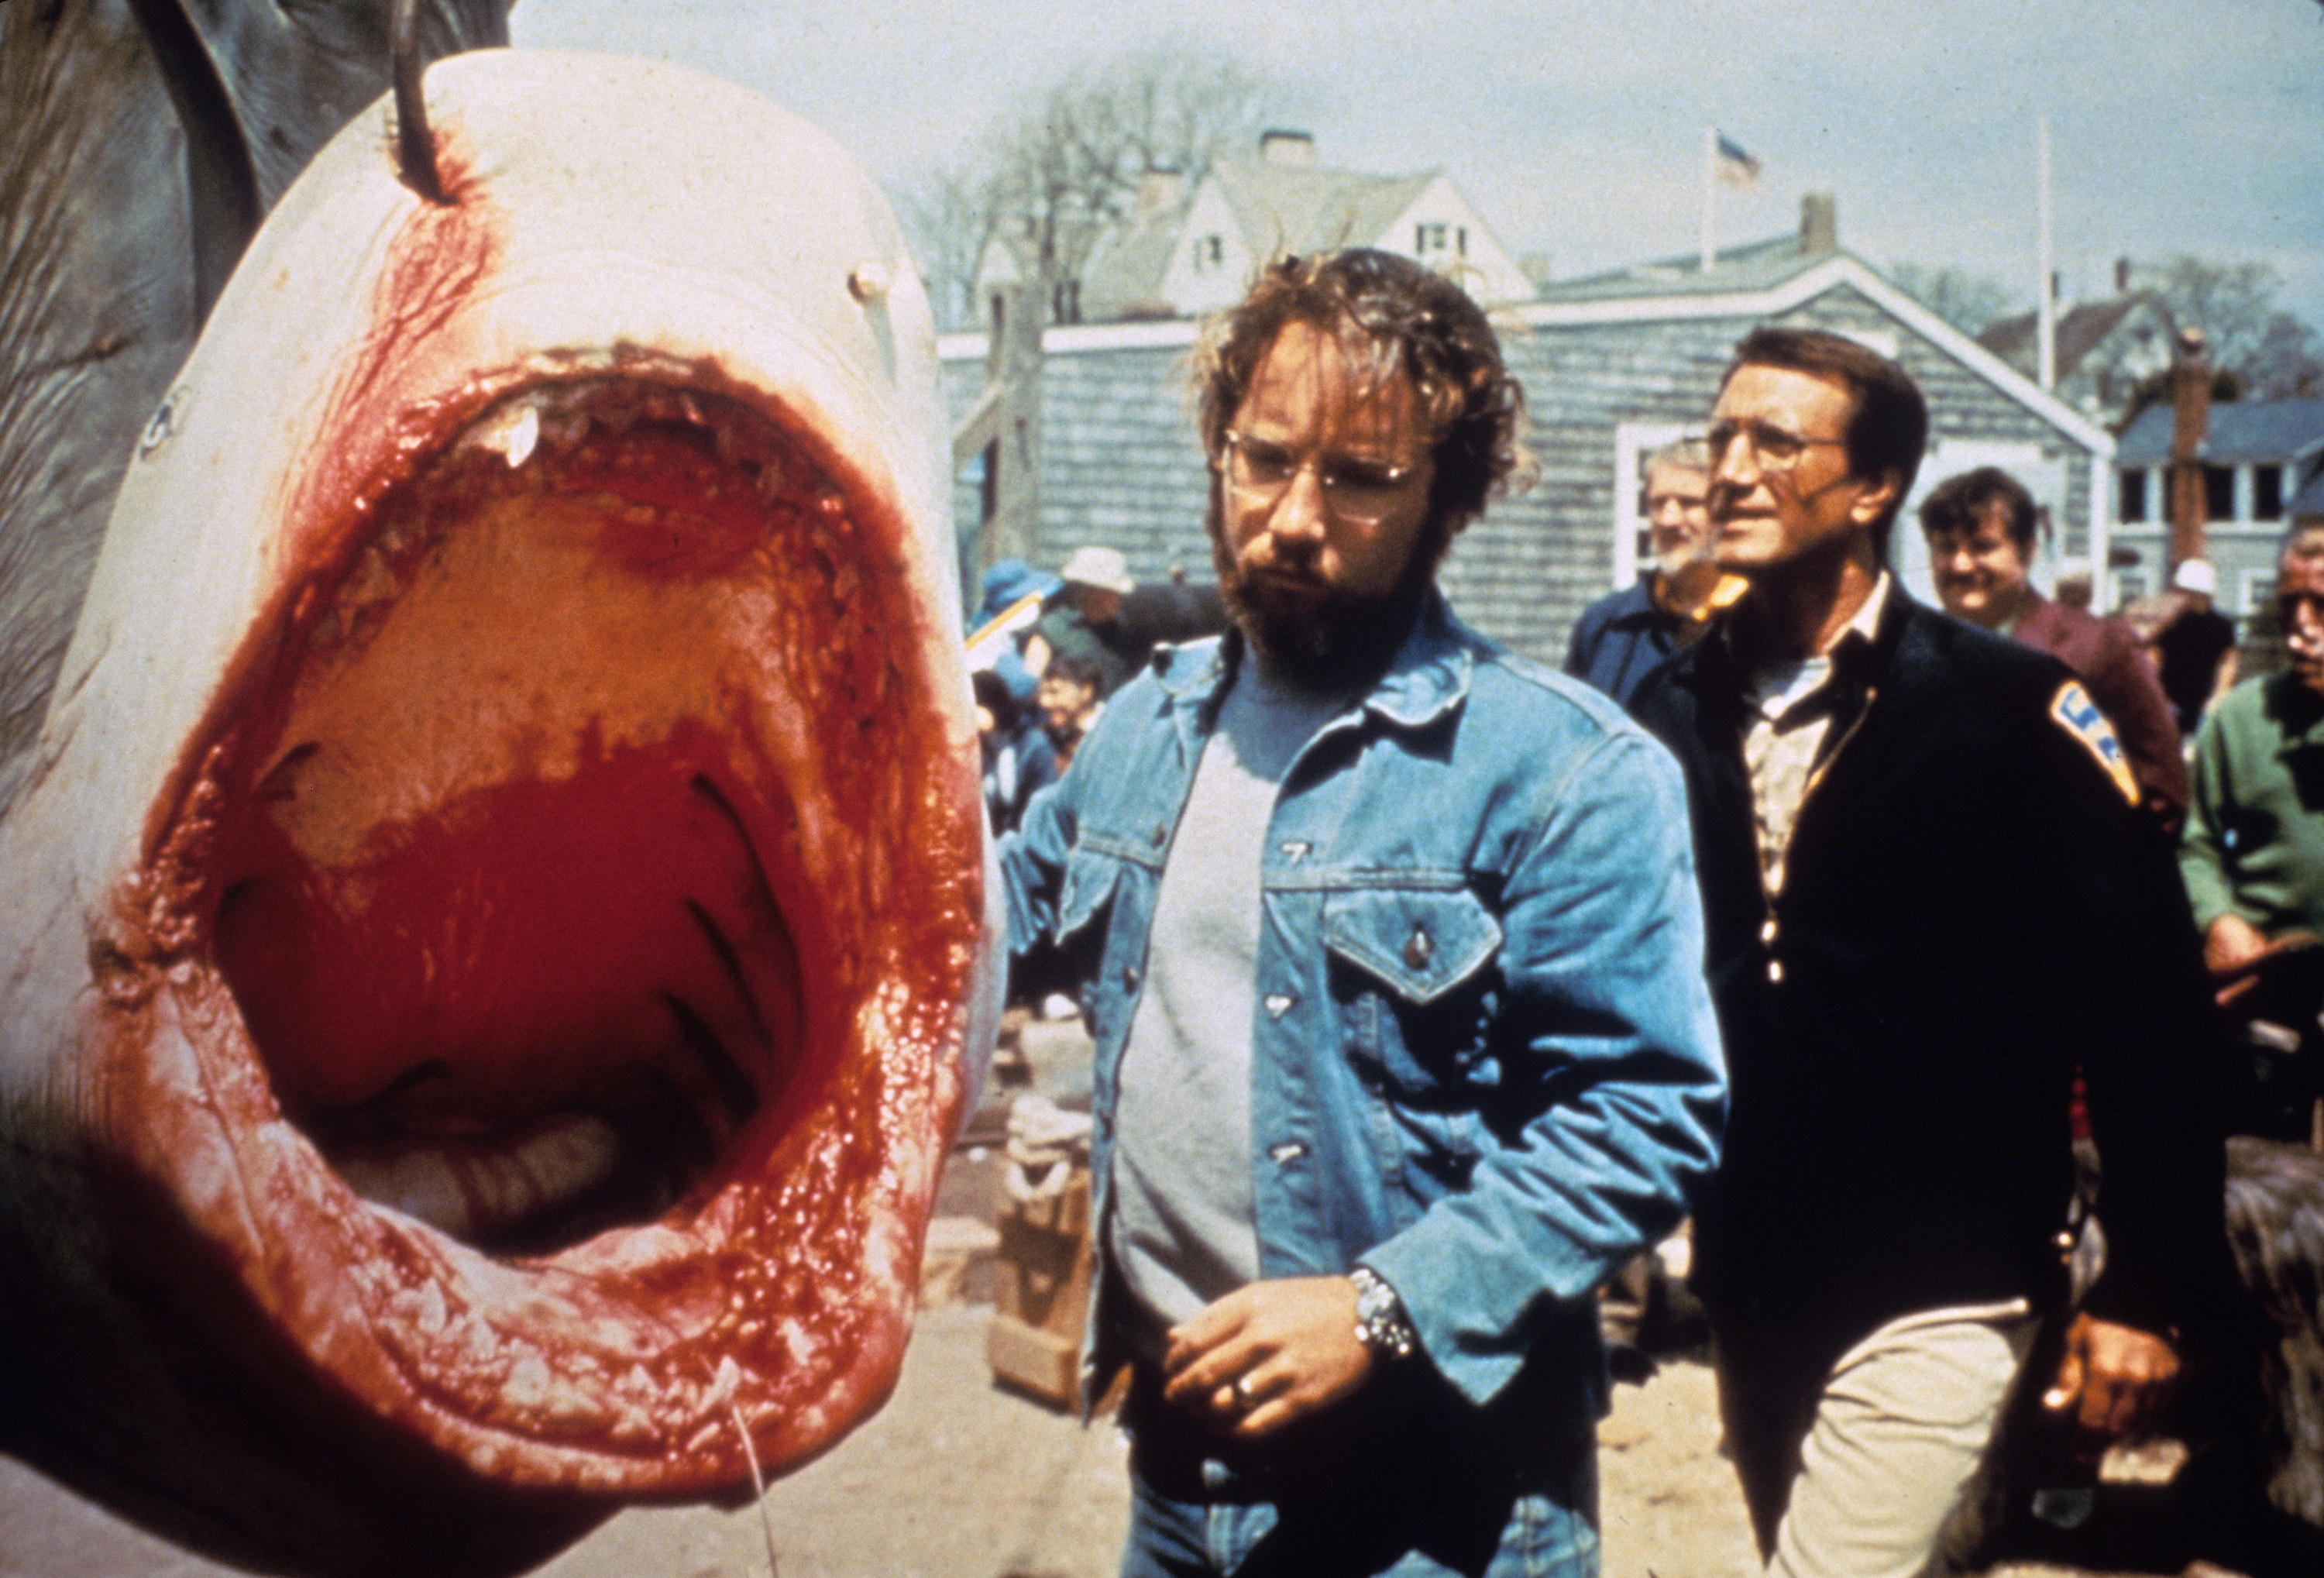 Two men standing beside a bloodied shark